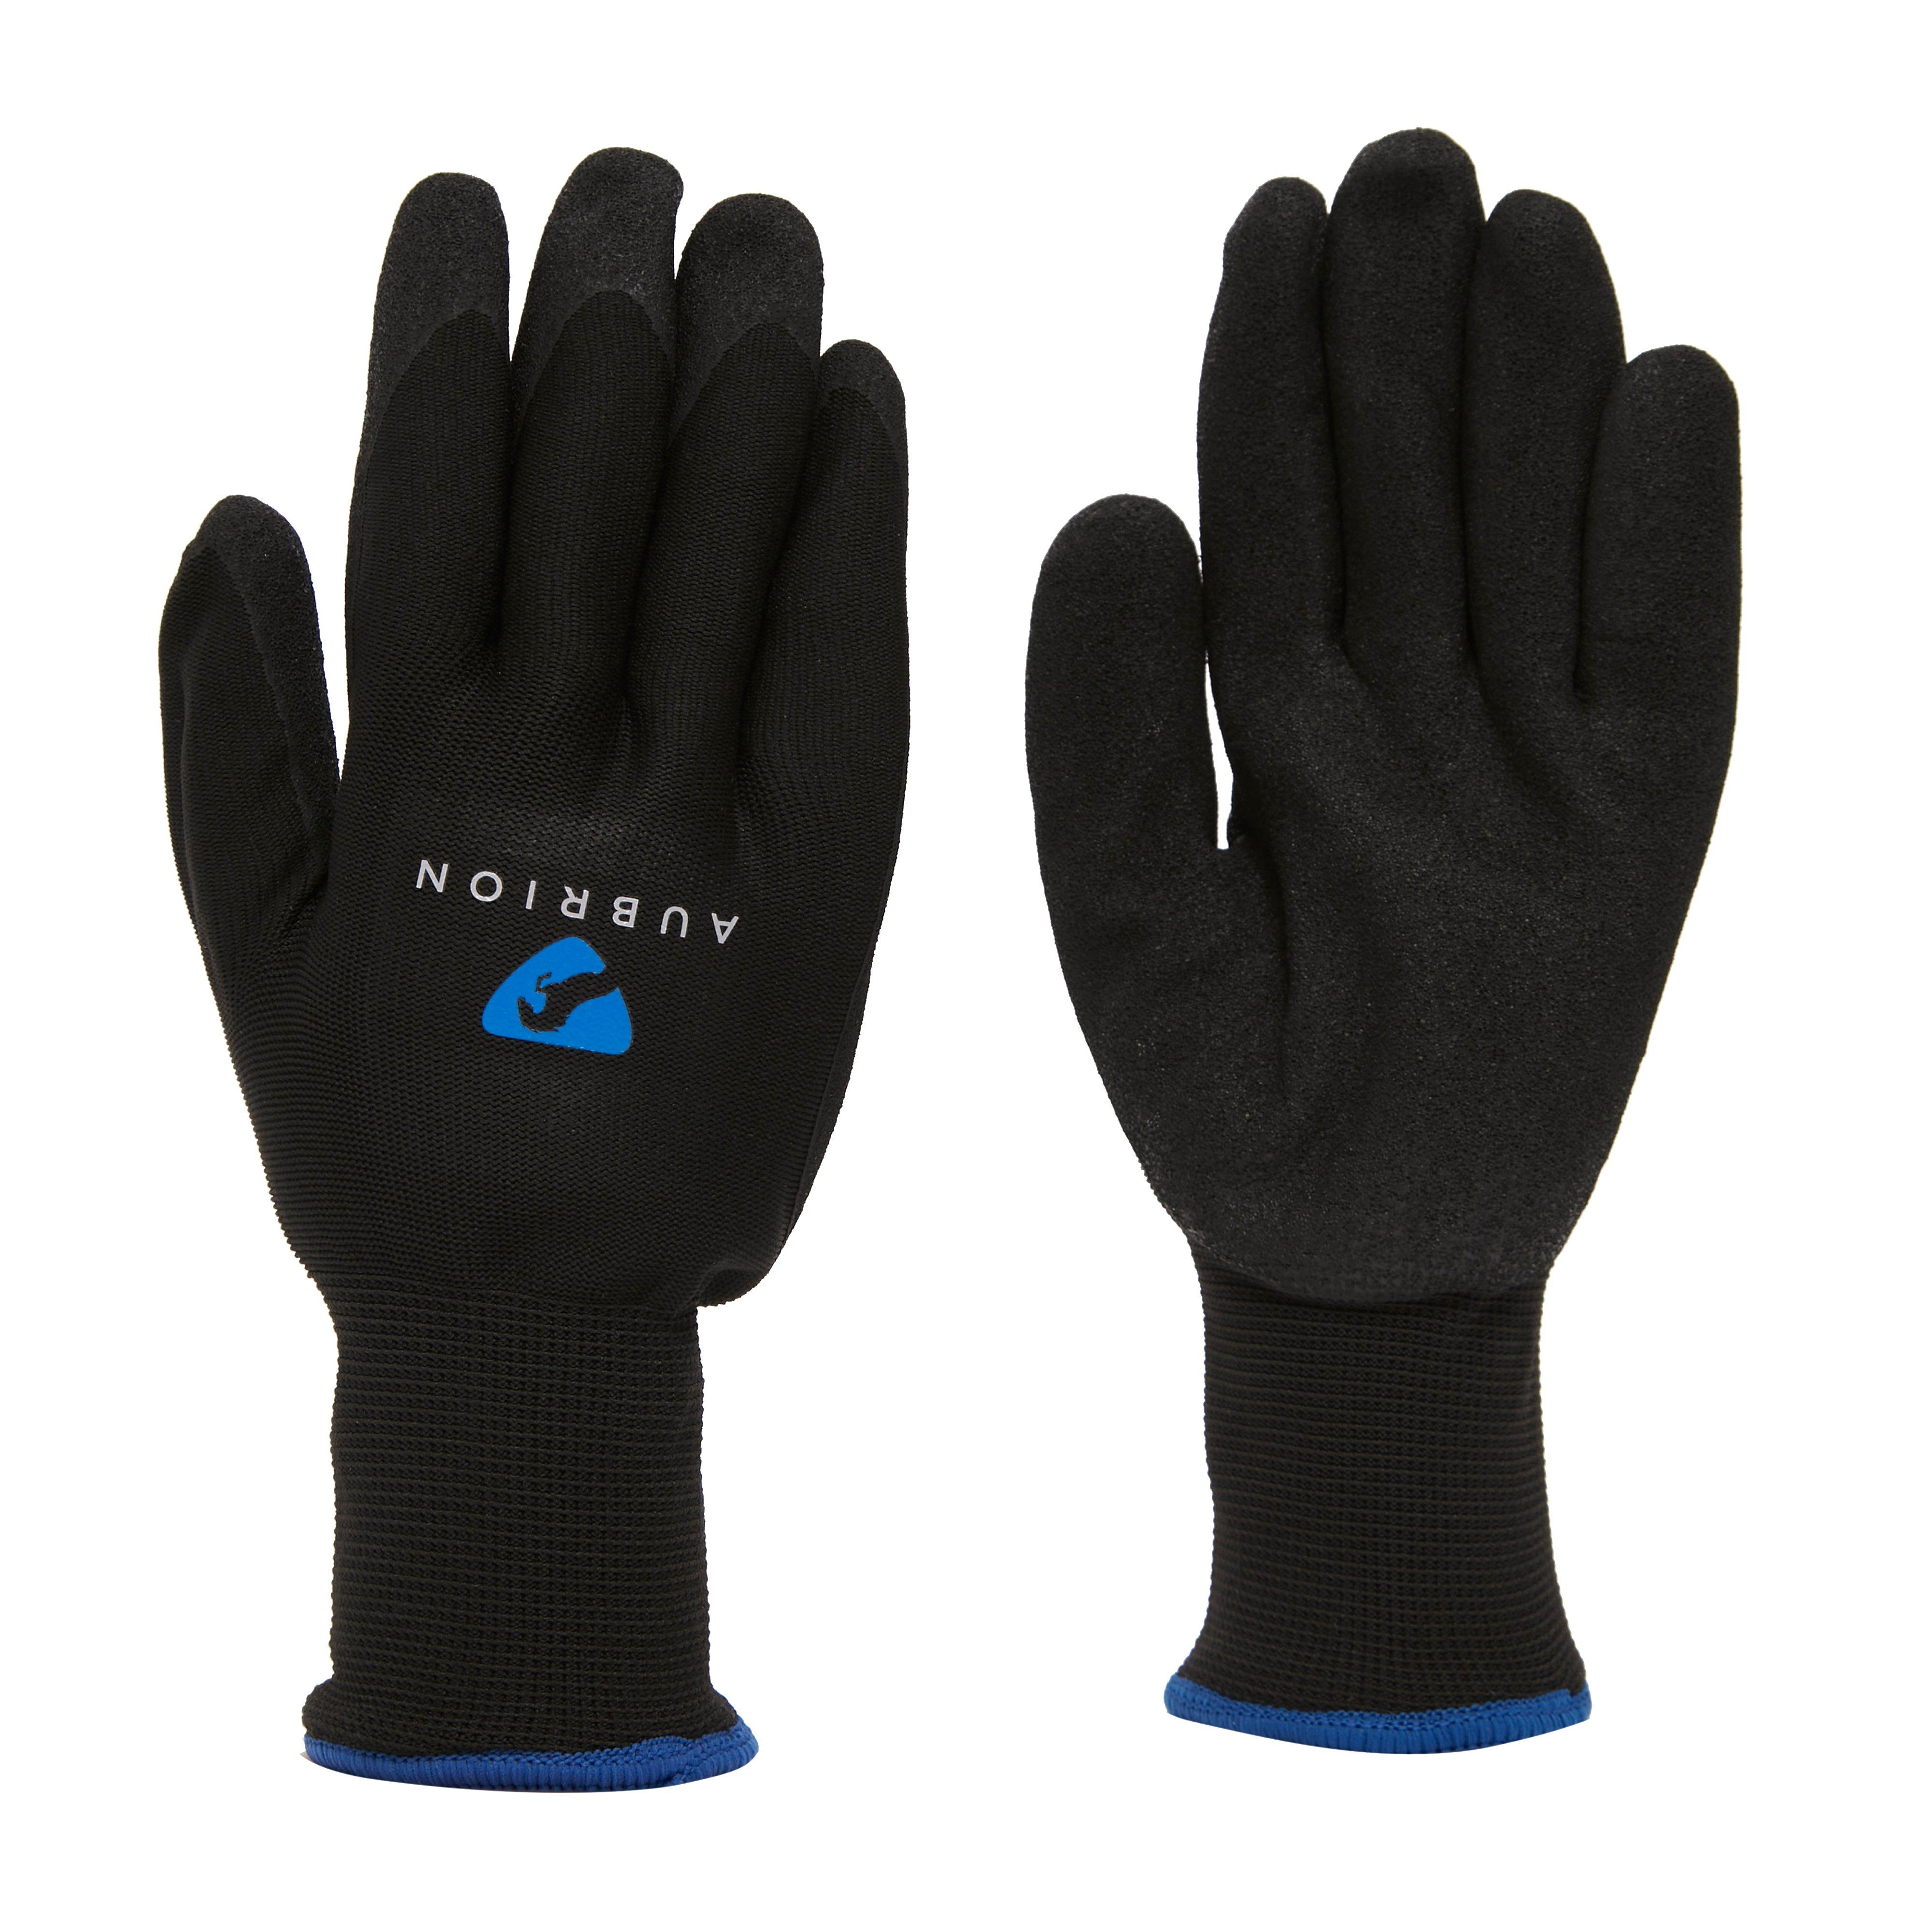 Aubrion All Purpose Winter Yard Gloves Review